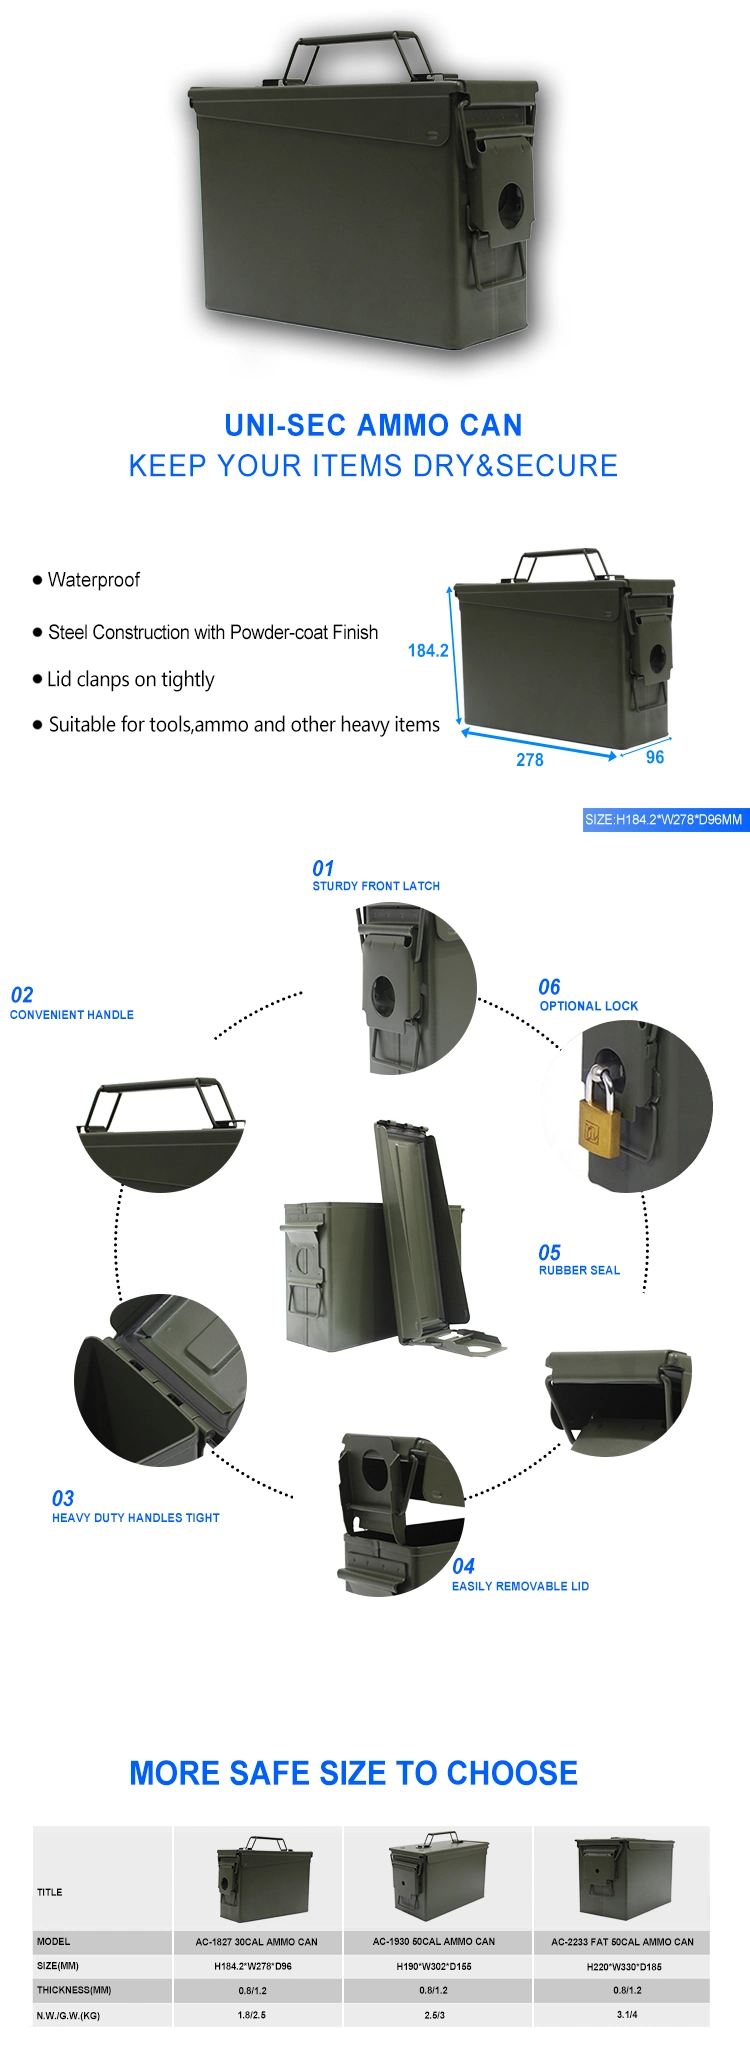 Brand New Technology China Manufacture Security Electronic Digital Home Ammo Can Wholesale Cheap Price (AC-2233)